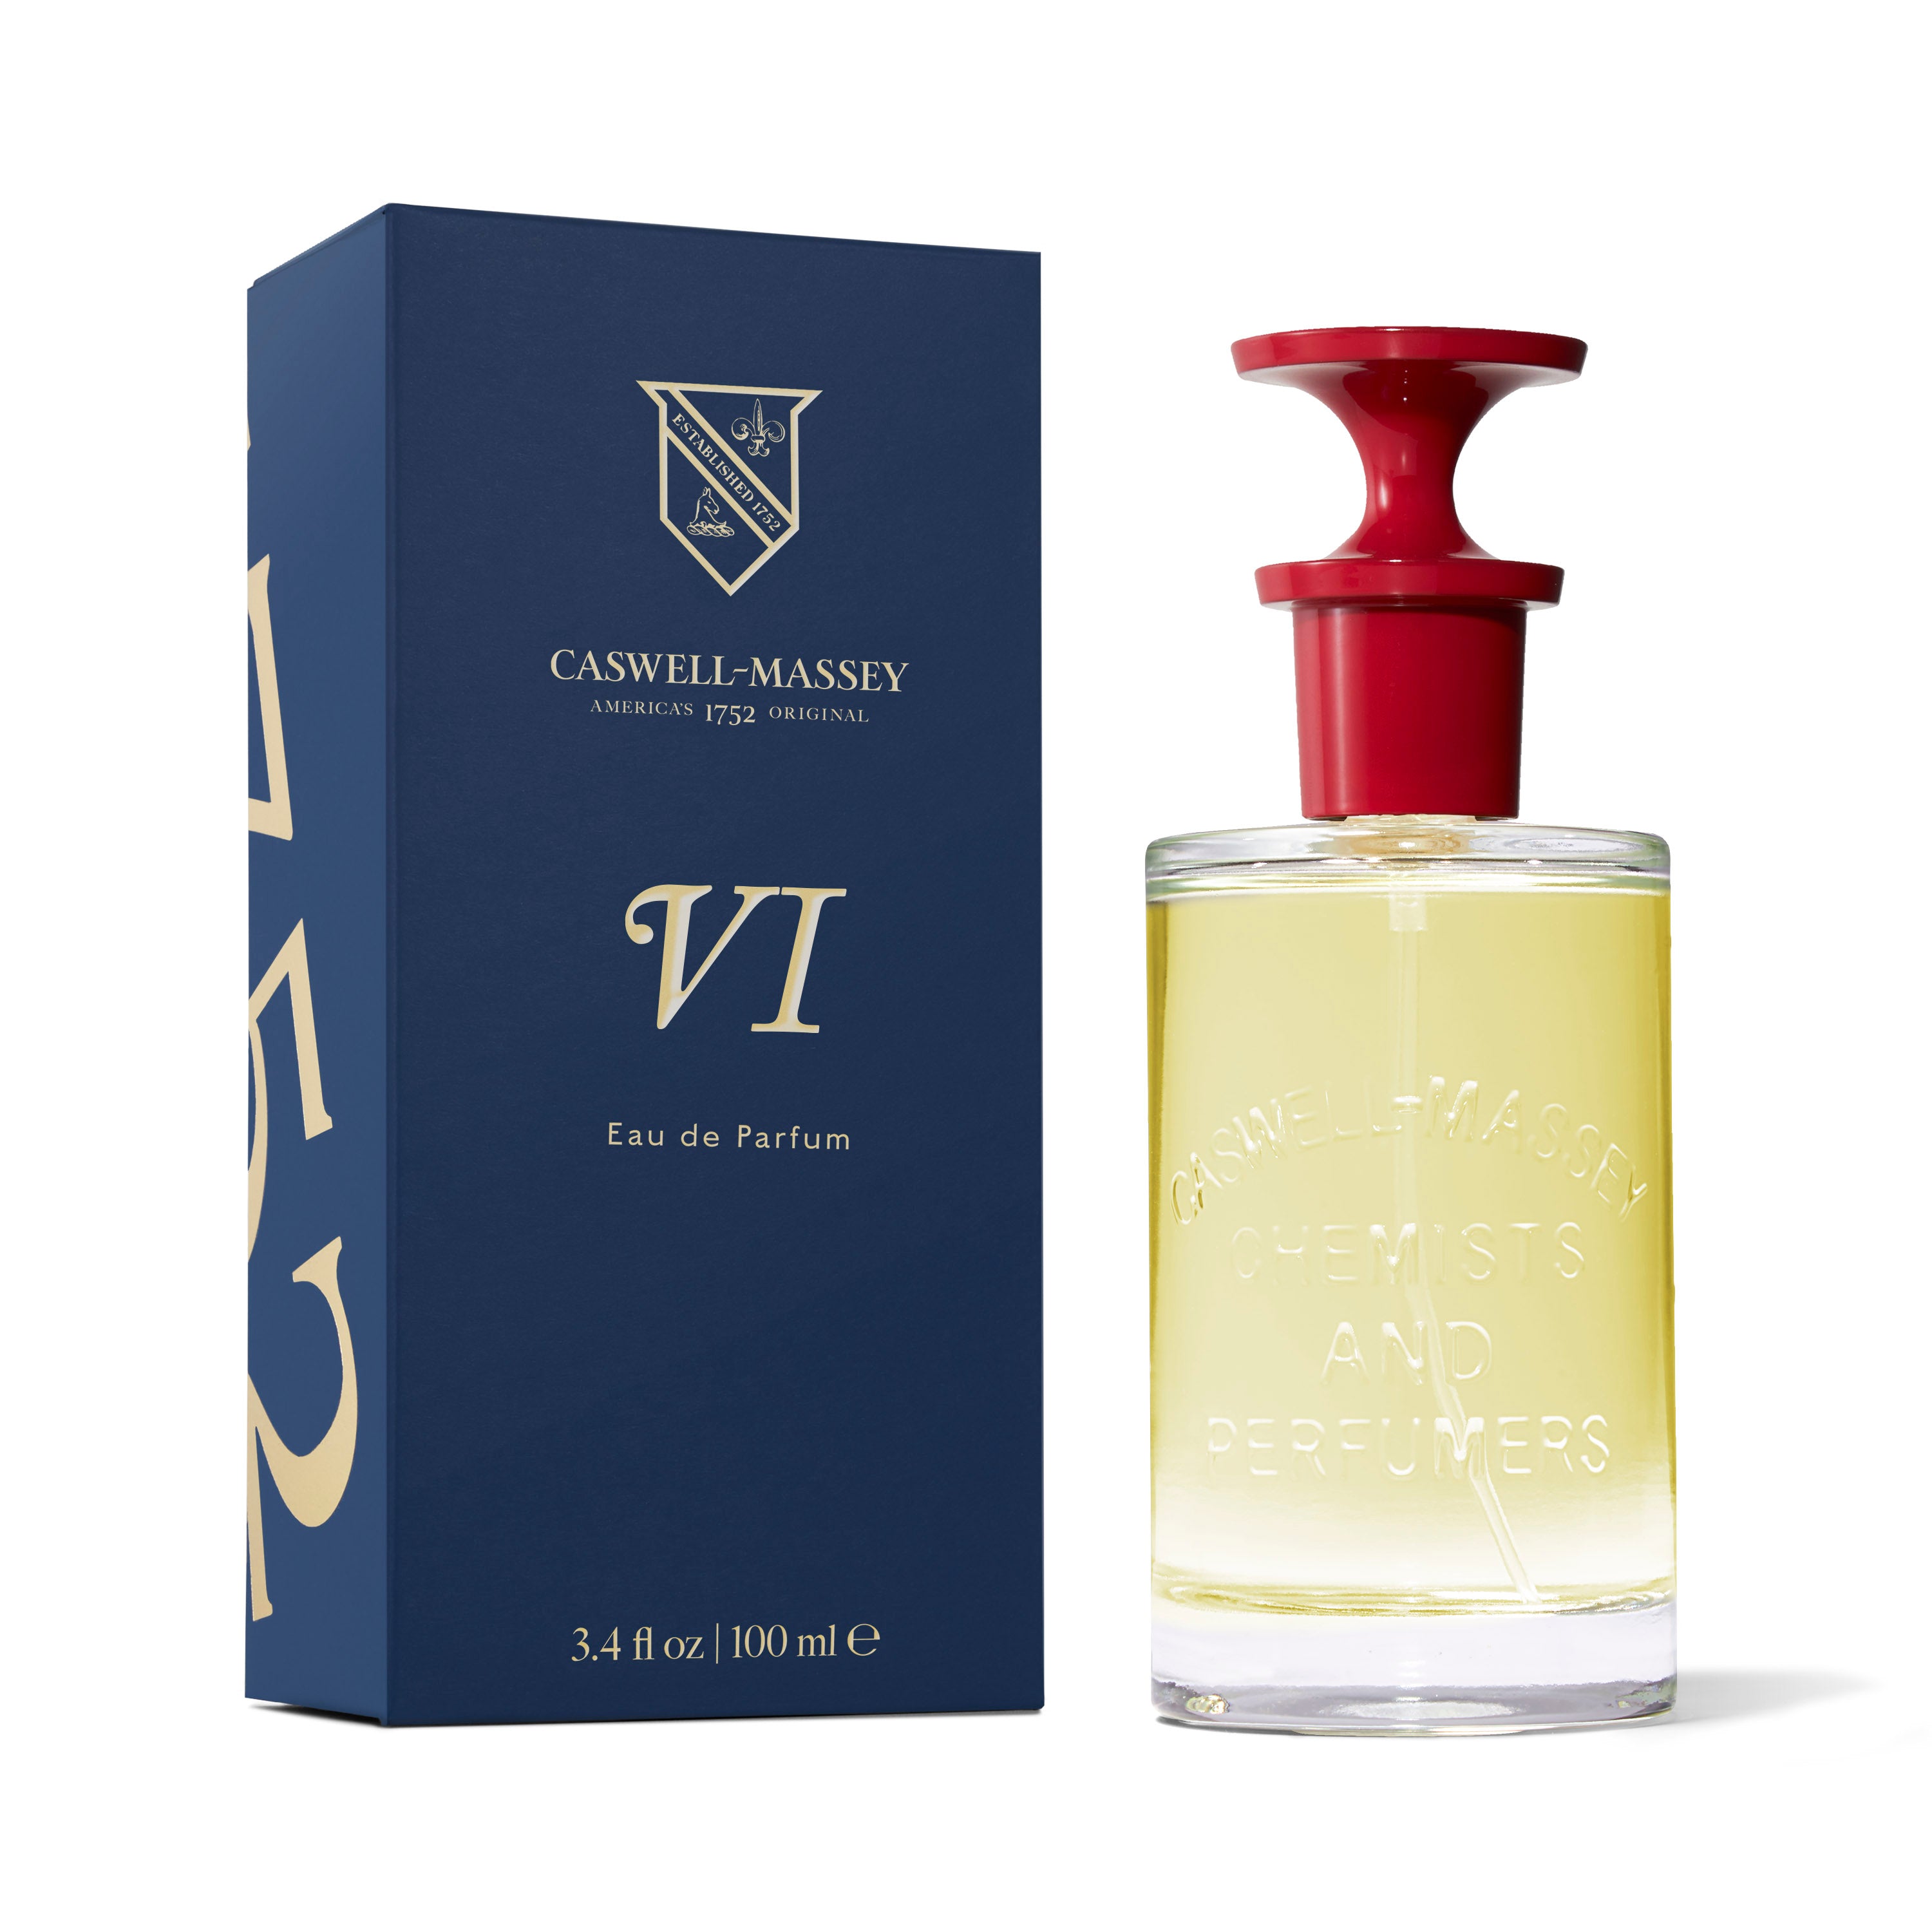 Number Six Eau de Parfum by Caswell-Massey, fragrance for men, 100mL Full-Size 